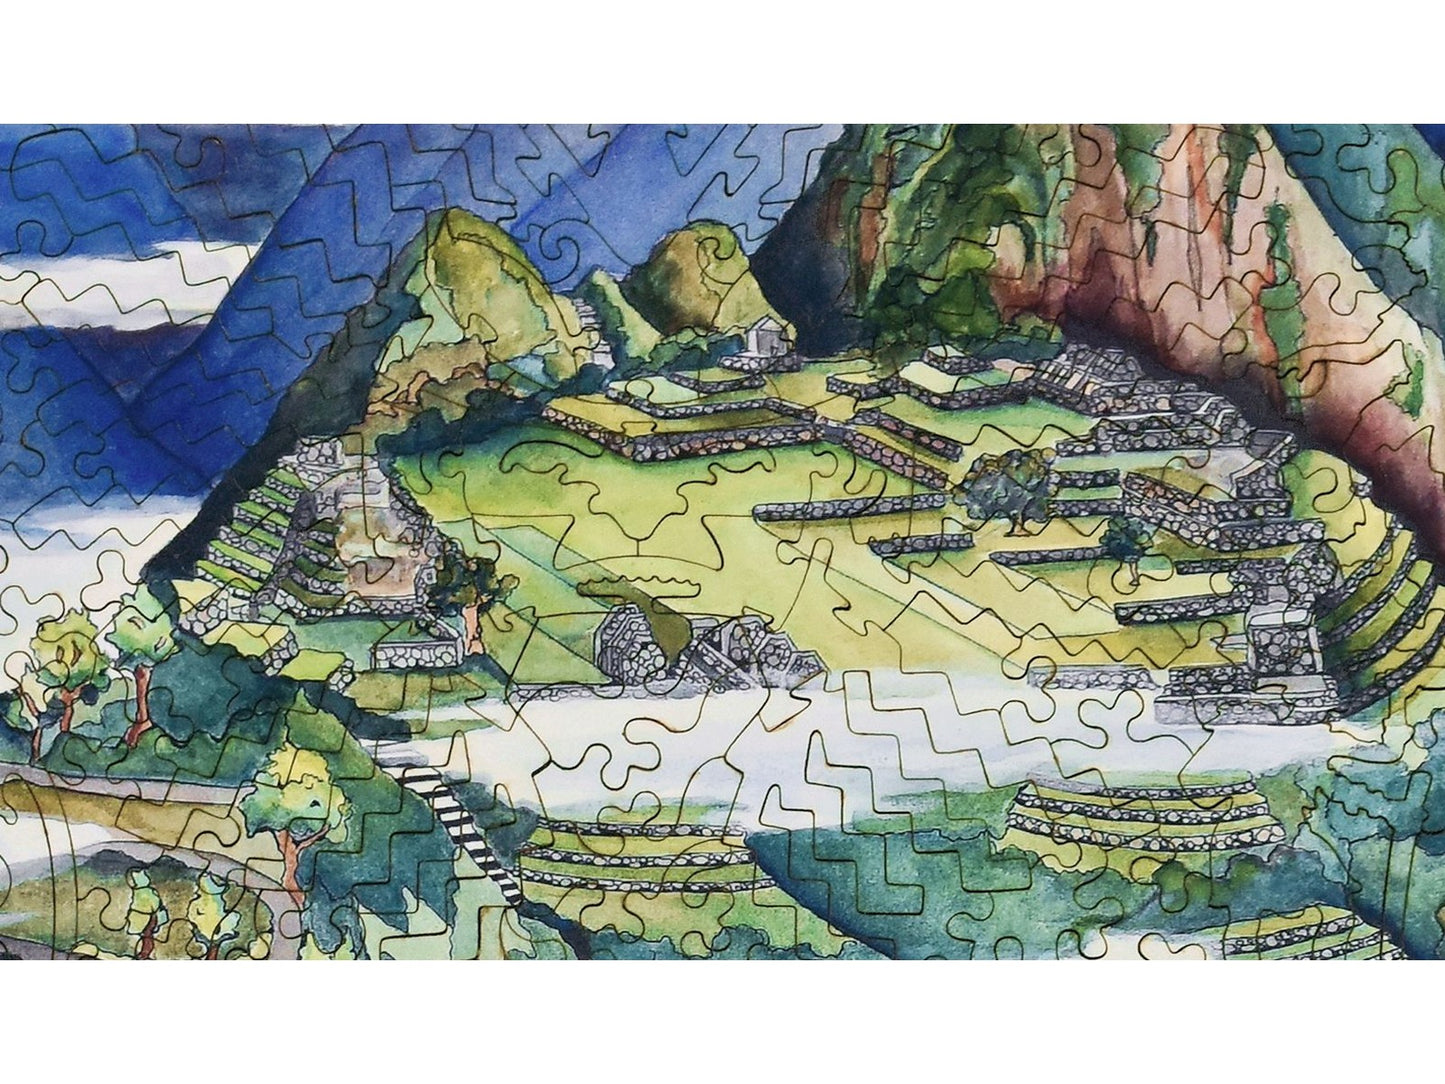 A closeup of the front of the puzzle, Machu Picchu, showing the detail in the pieces.